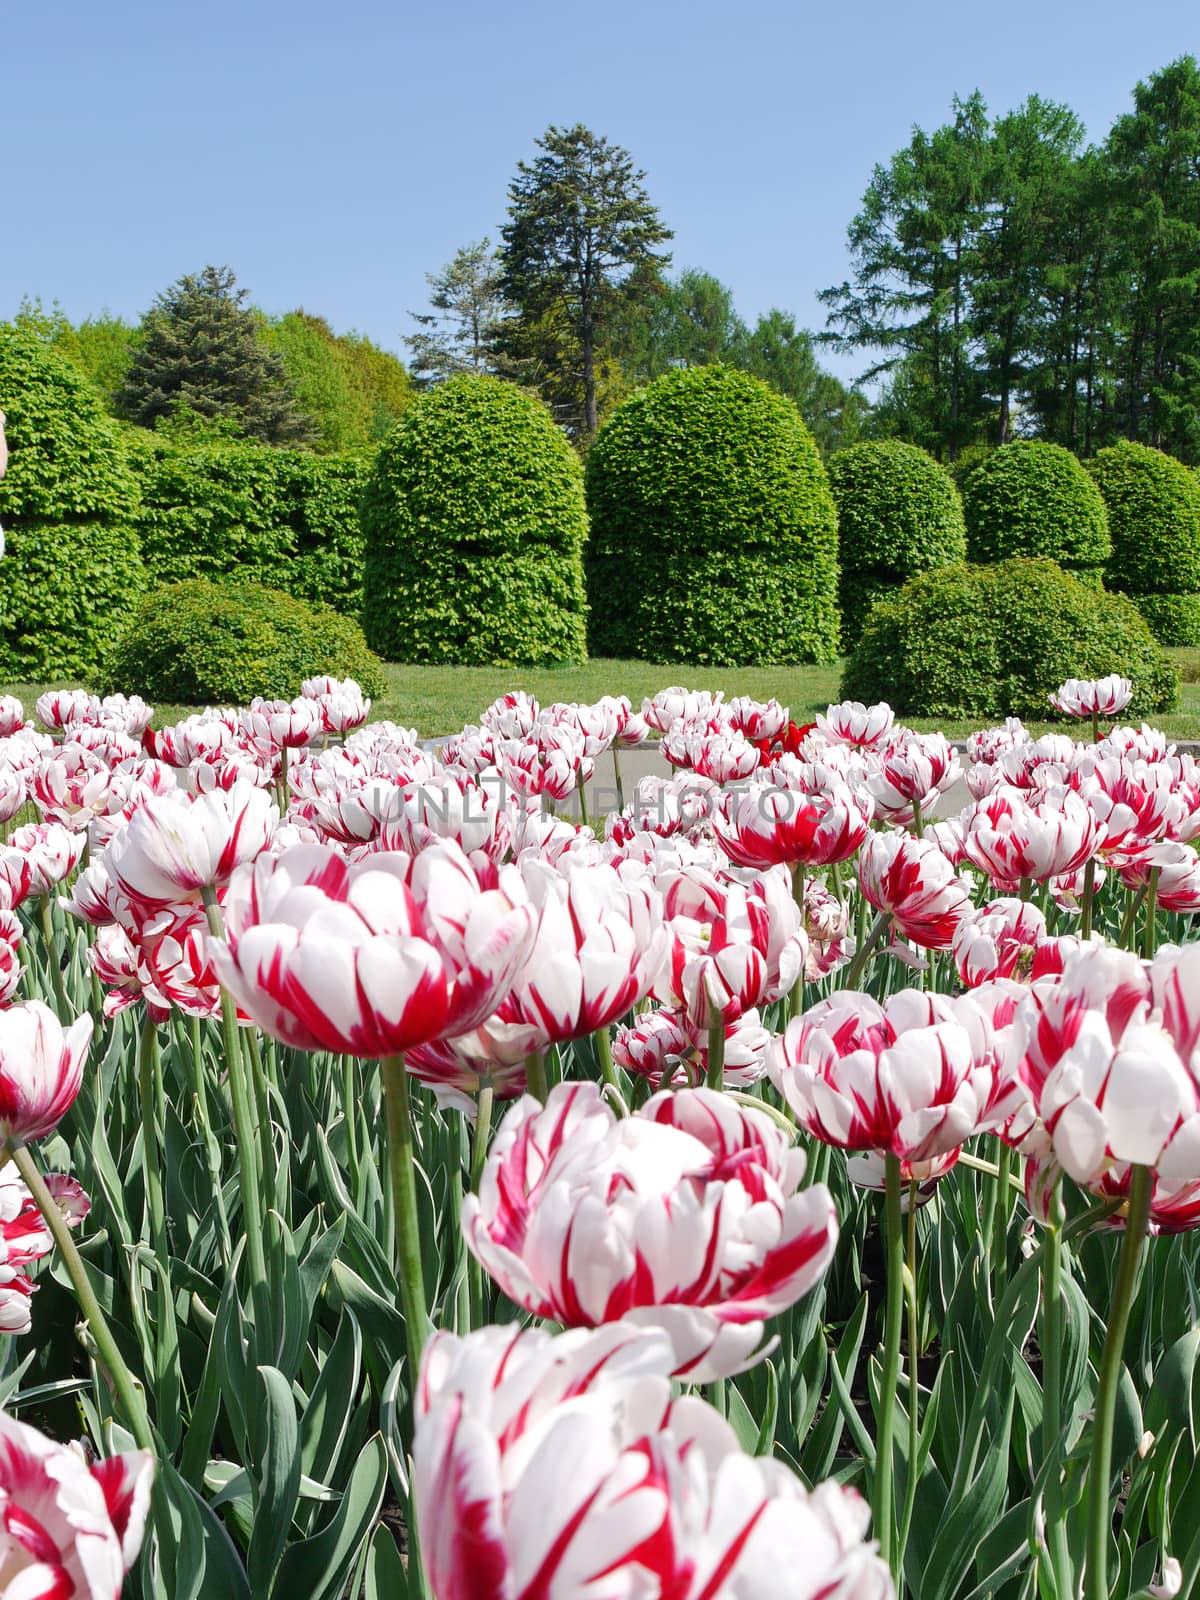 A flower bed with a huge number of red-and-white tulips against a background of trimmed green bushes